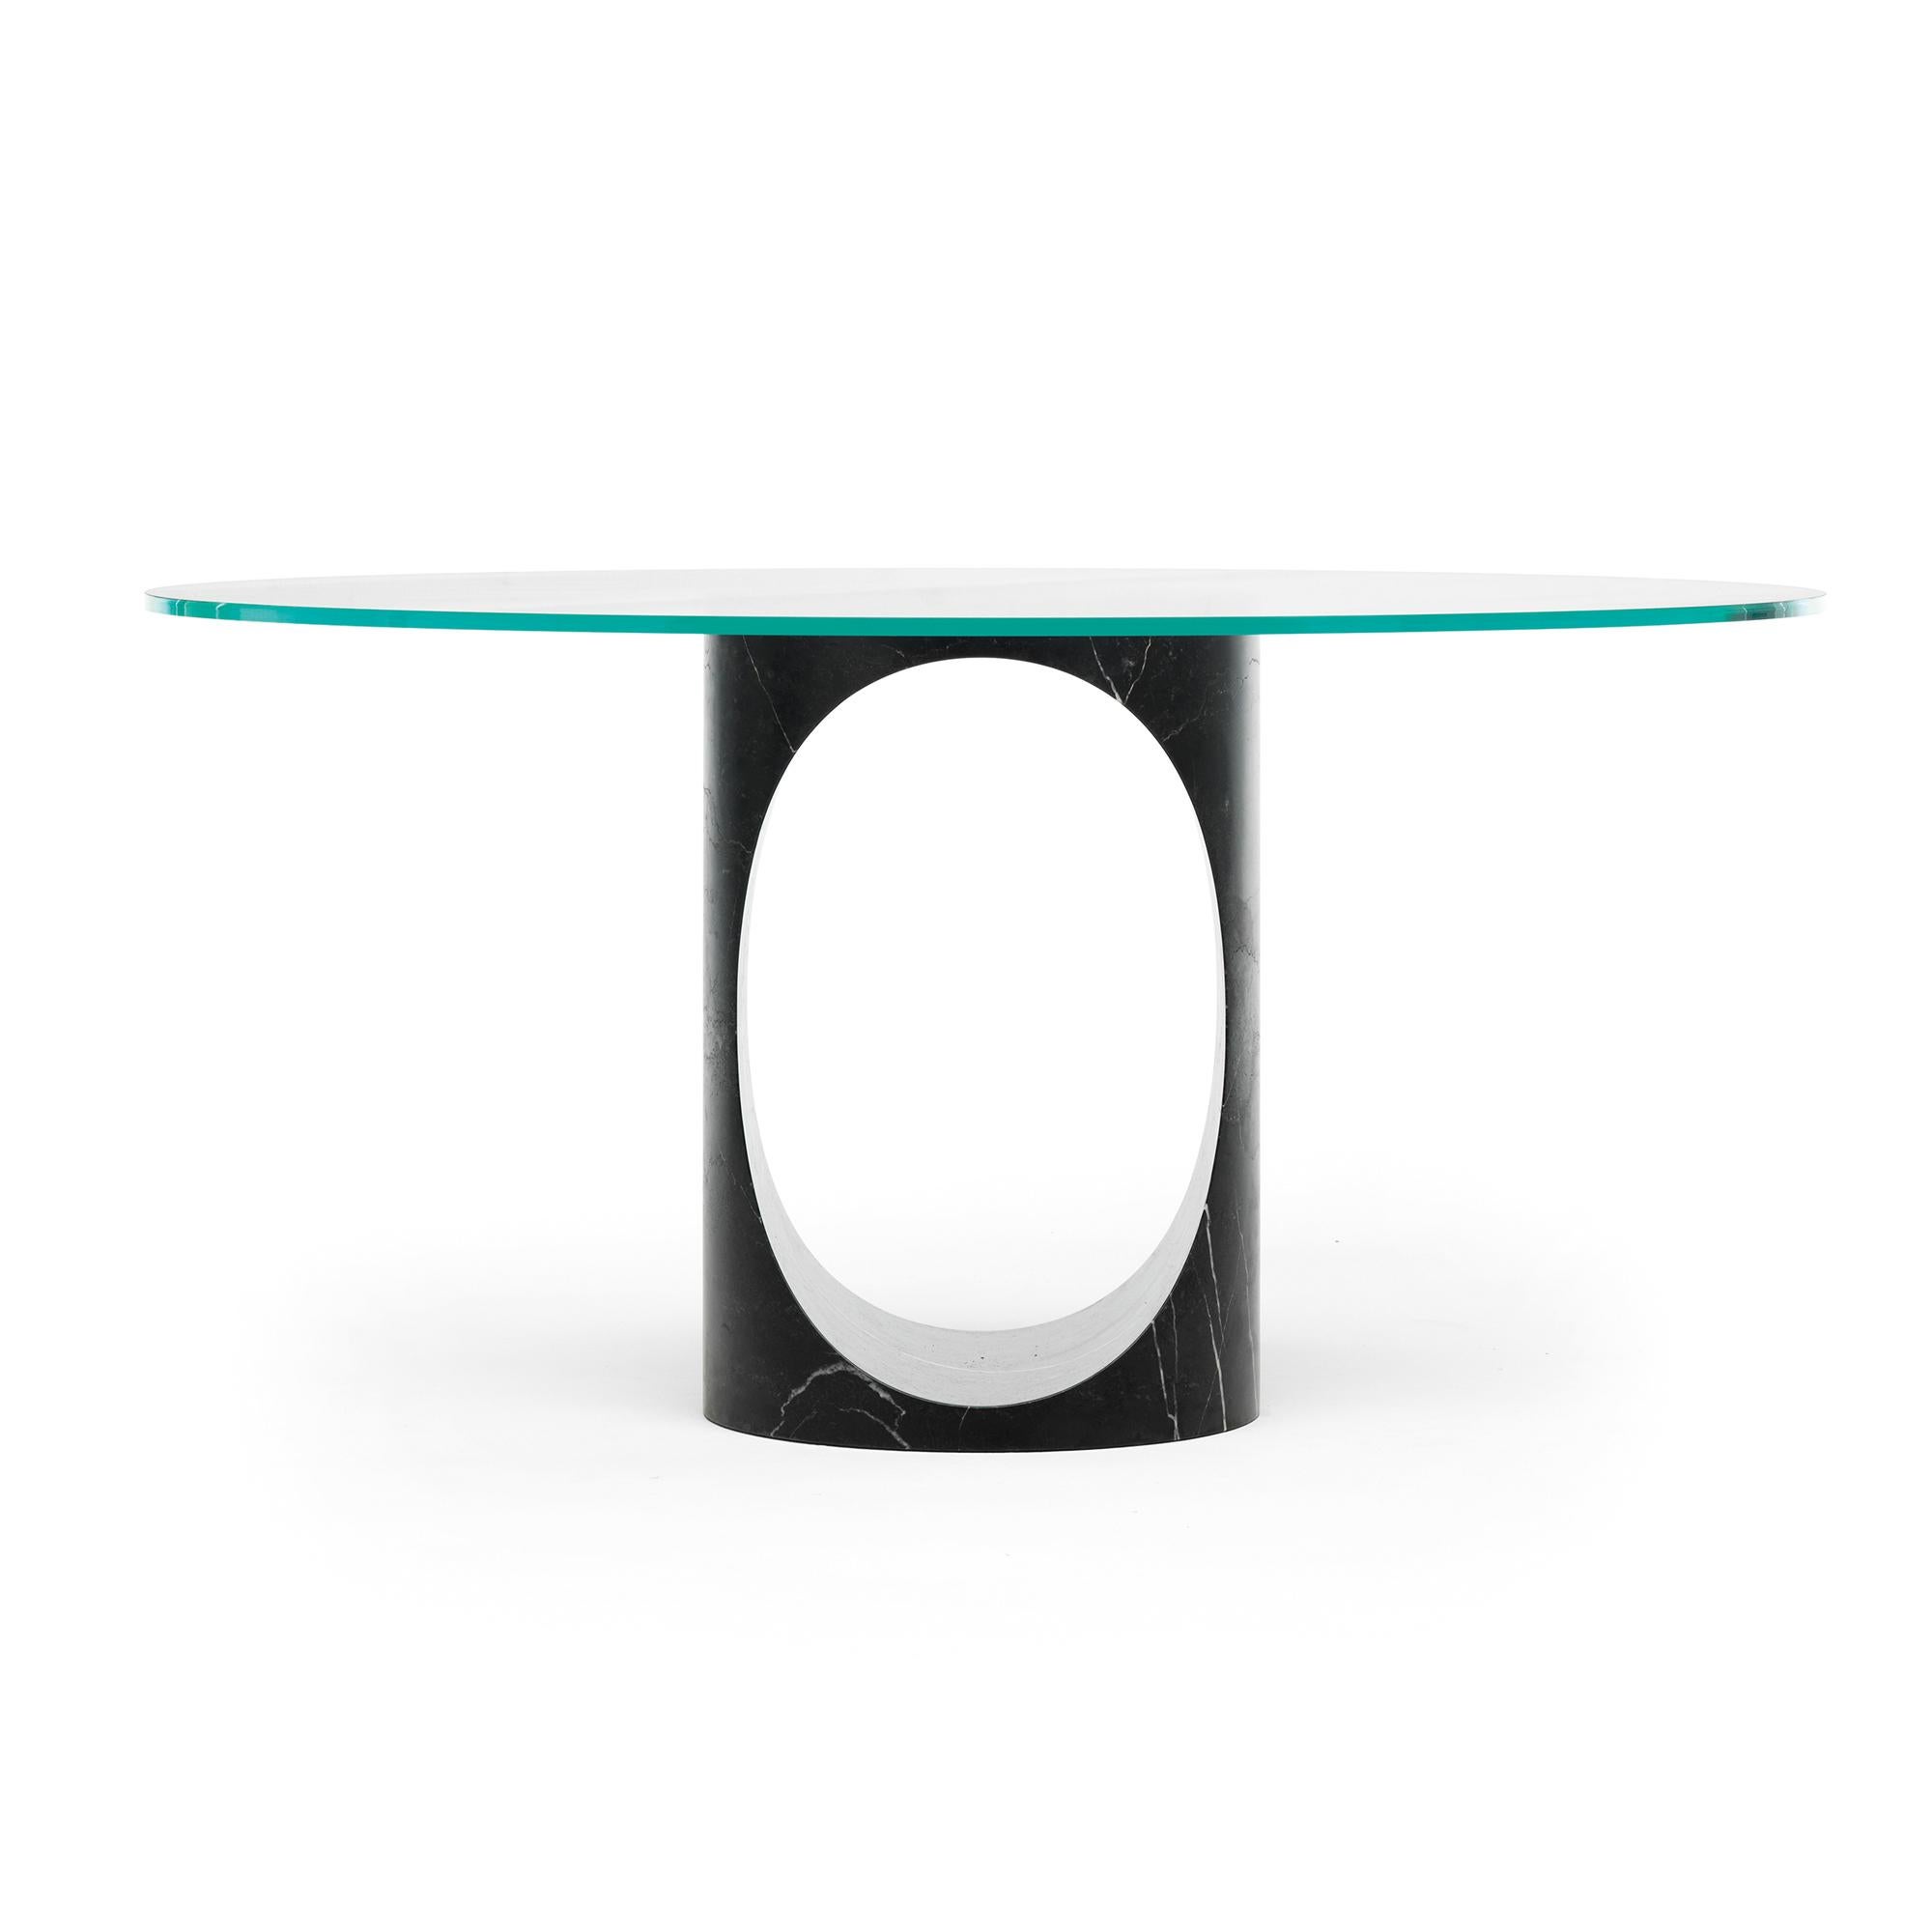 Roll is Epònimo’s central stem dining table. The base, carved from a single block of marble, is a geometric and yet organic sculpture that changes dramatically when viewed from different angles. Functionally it supports a thick but clear glass top